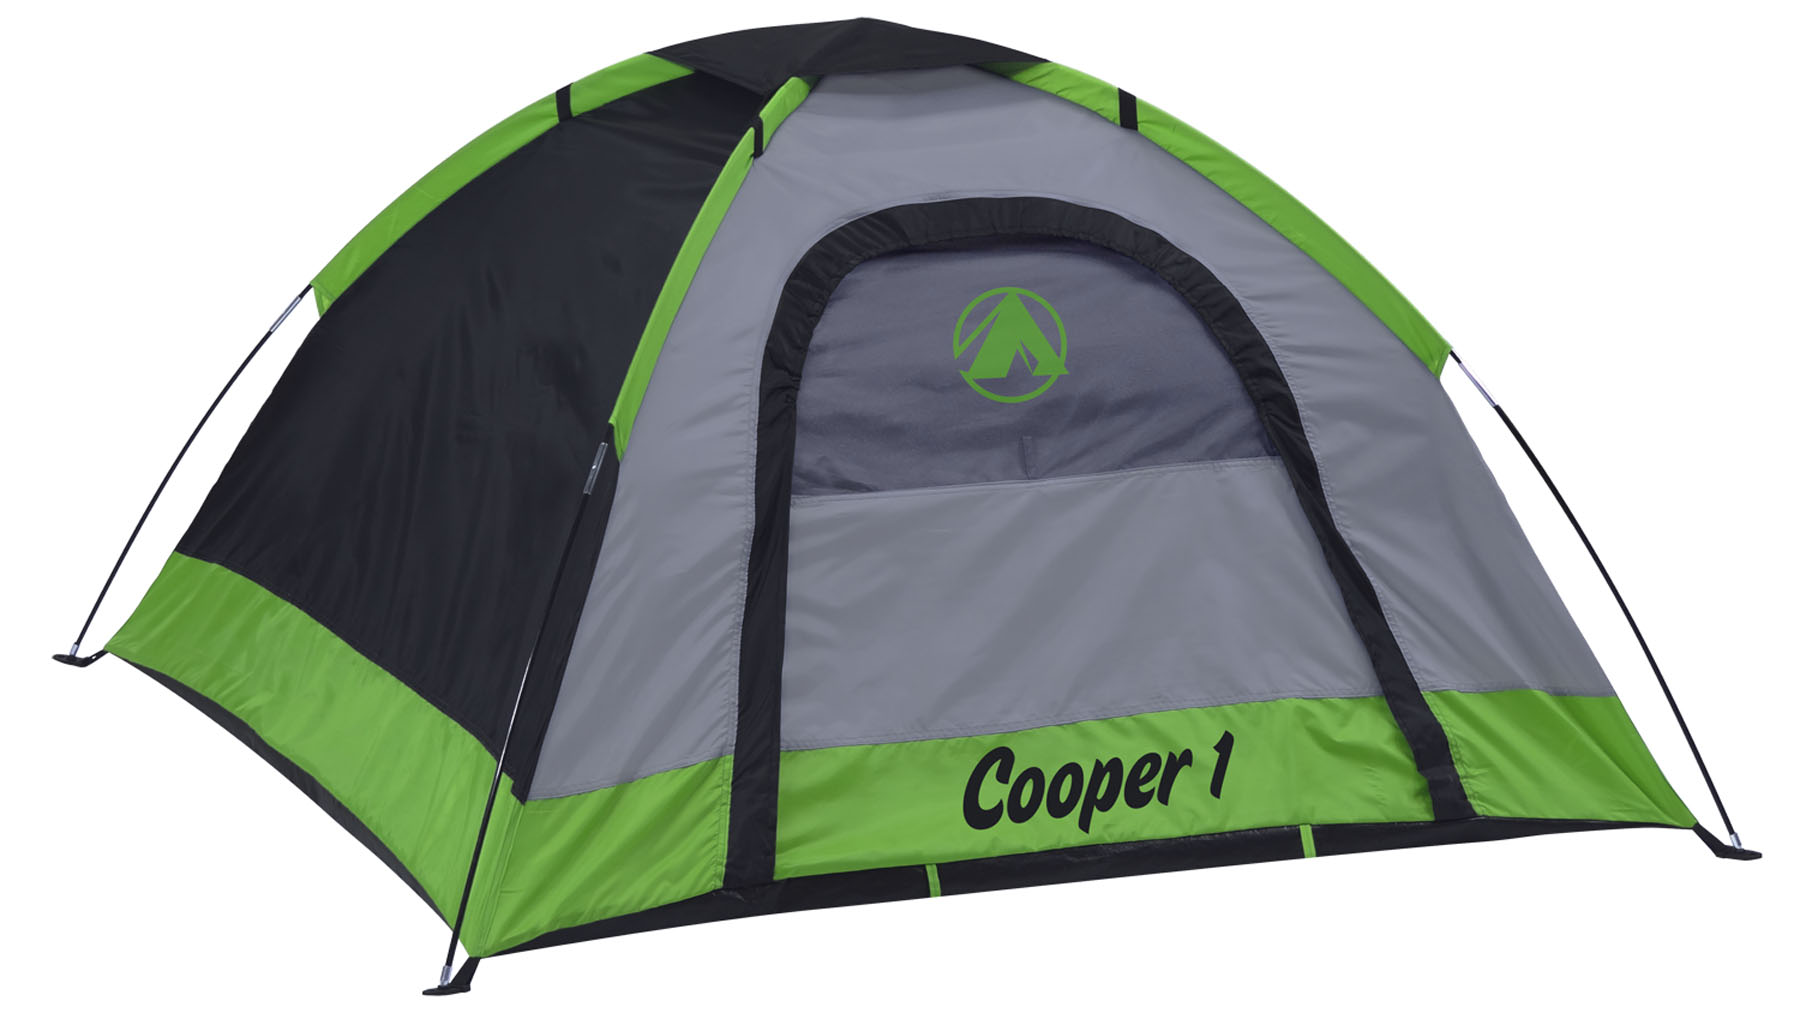 GigaTent 2 Person Dome Tent - image 1 of 3